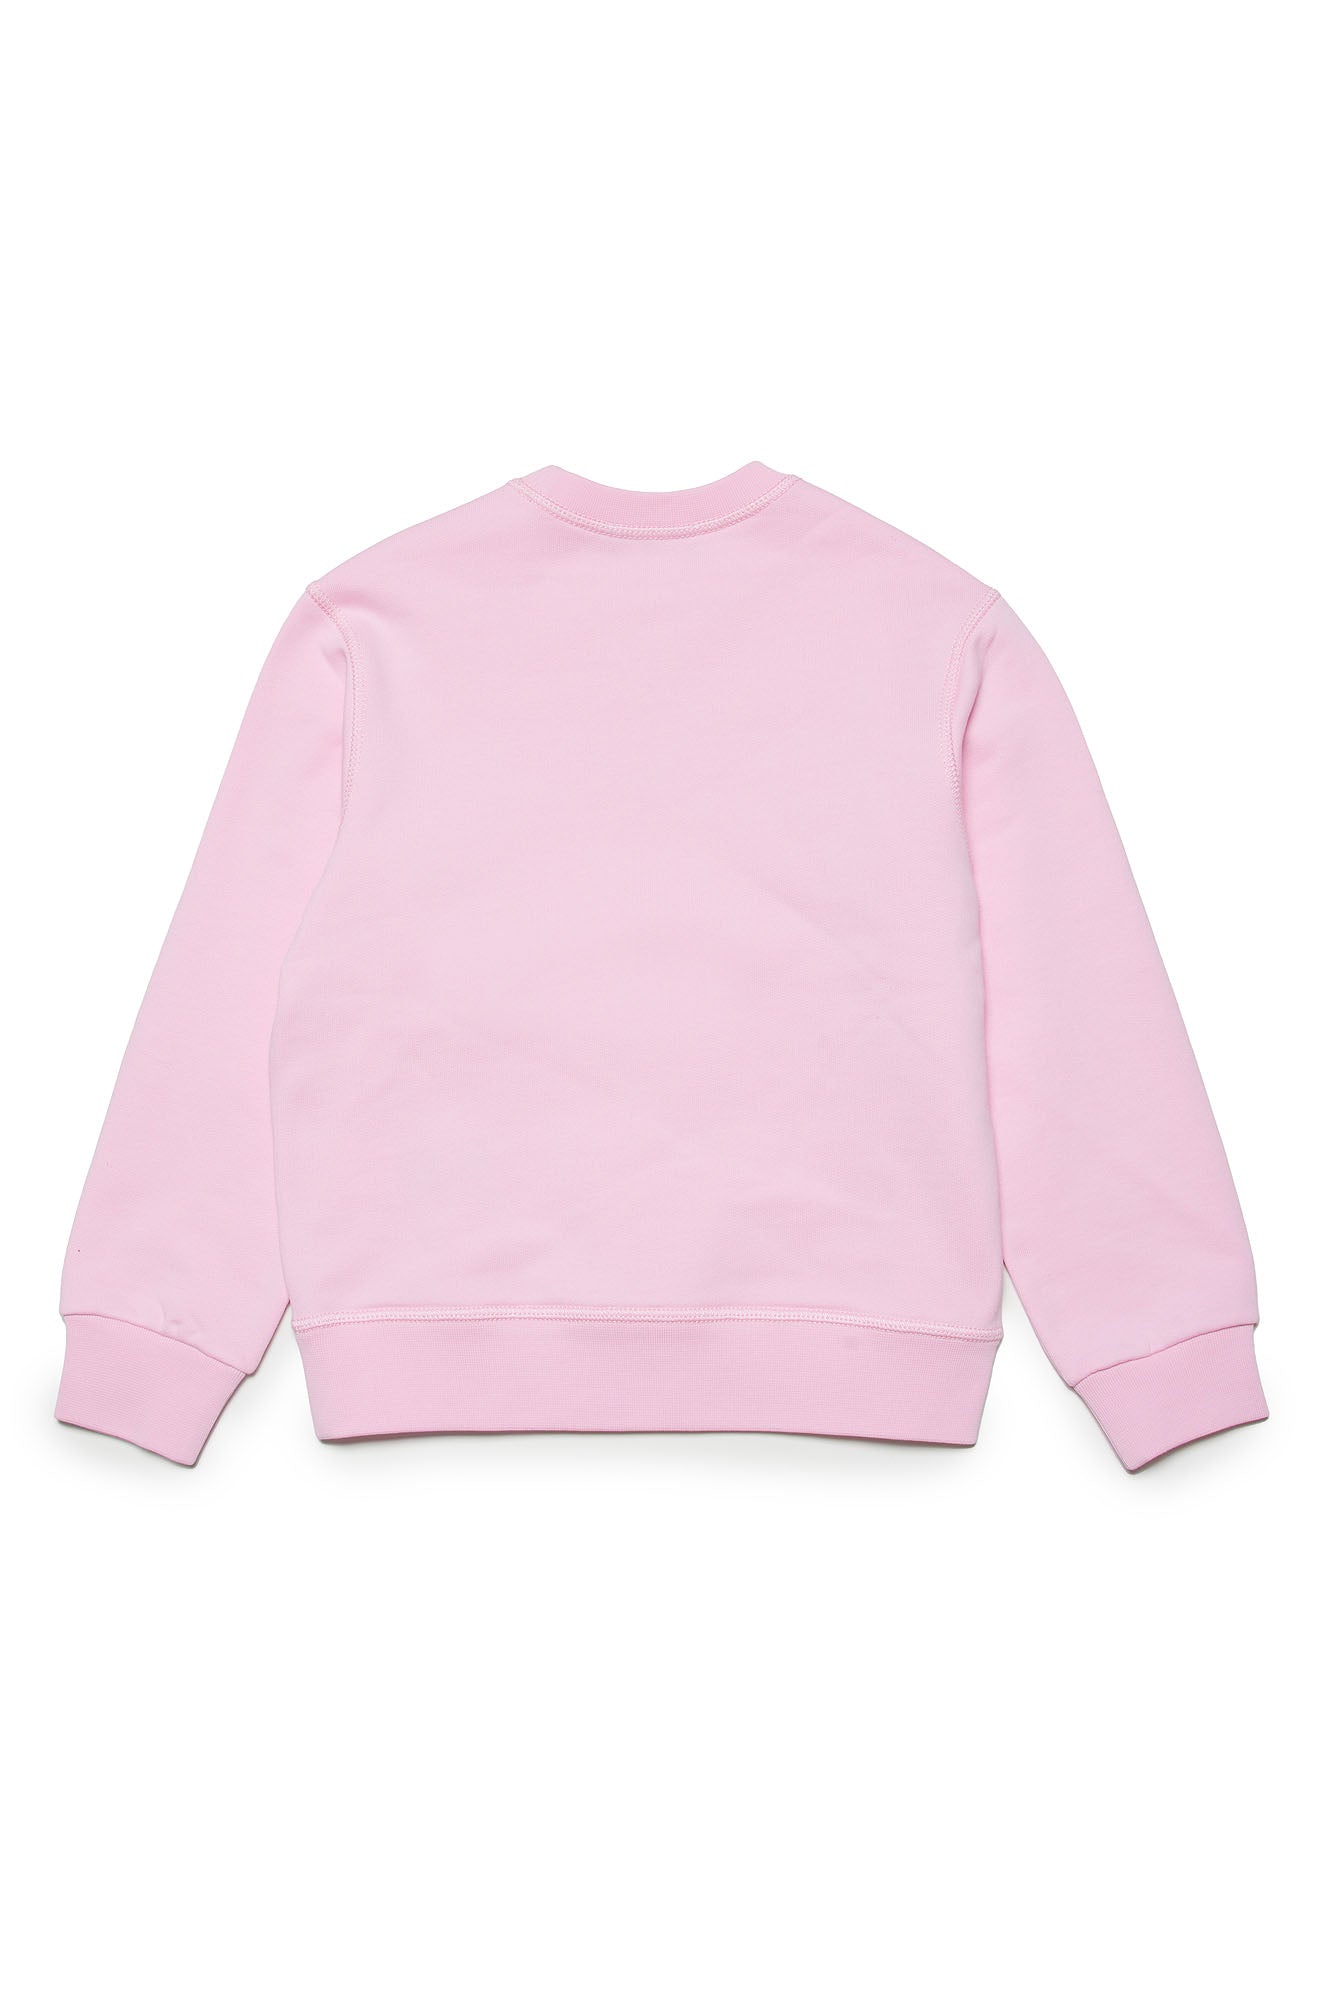 Dsquared2 Felpa Unisex Bambino DQ2009 D0A4D PINK LADY